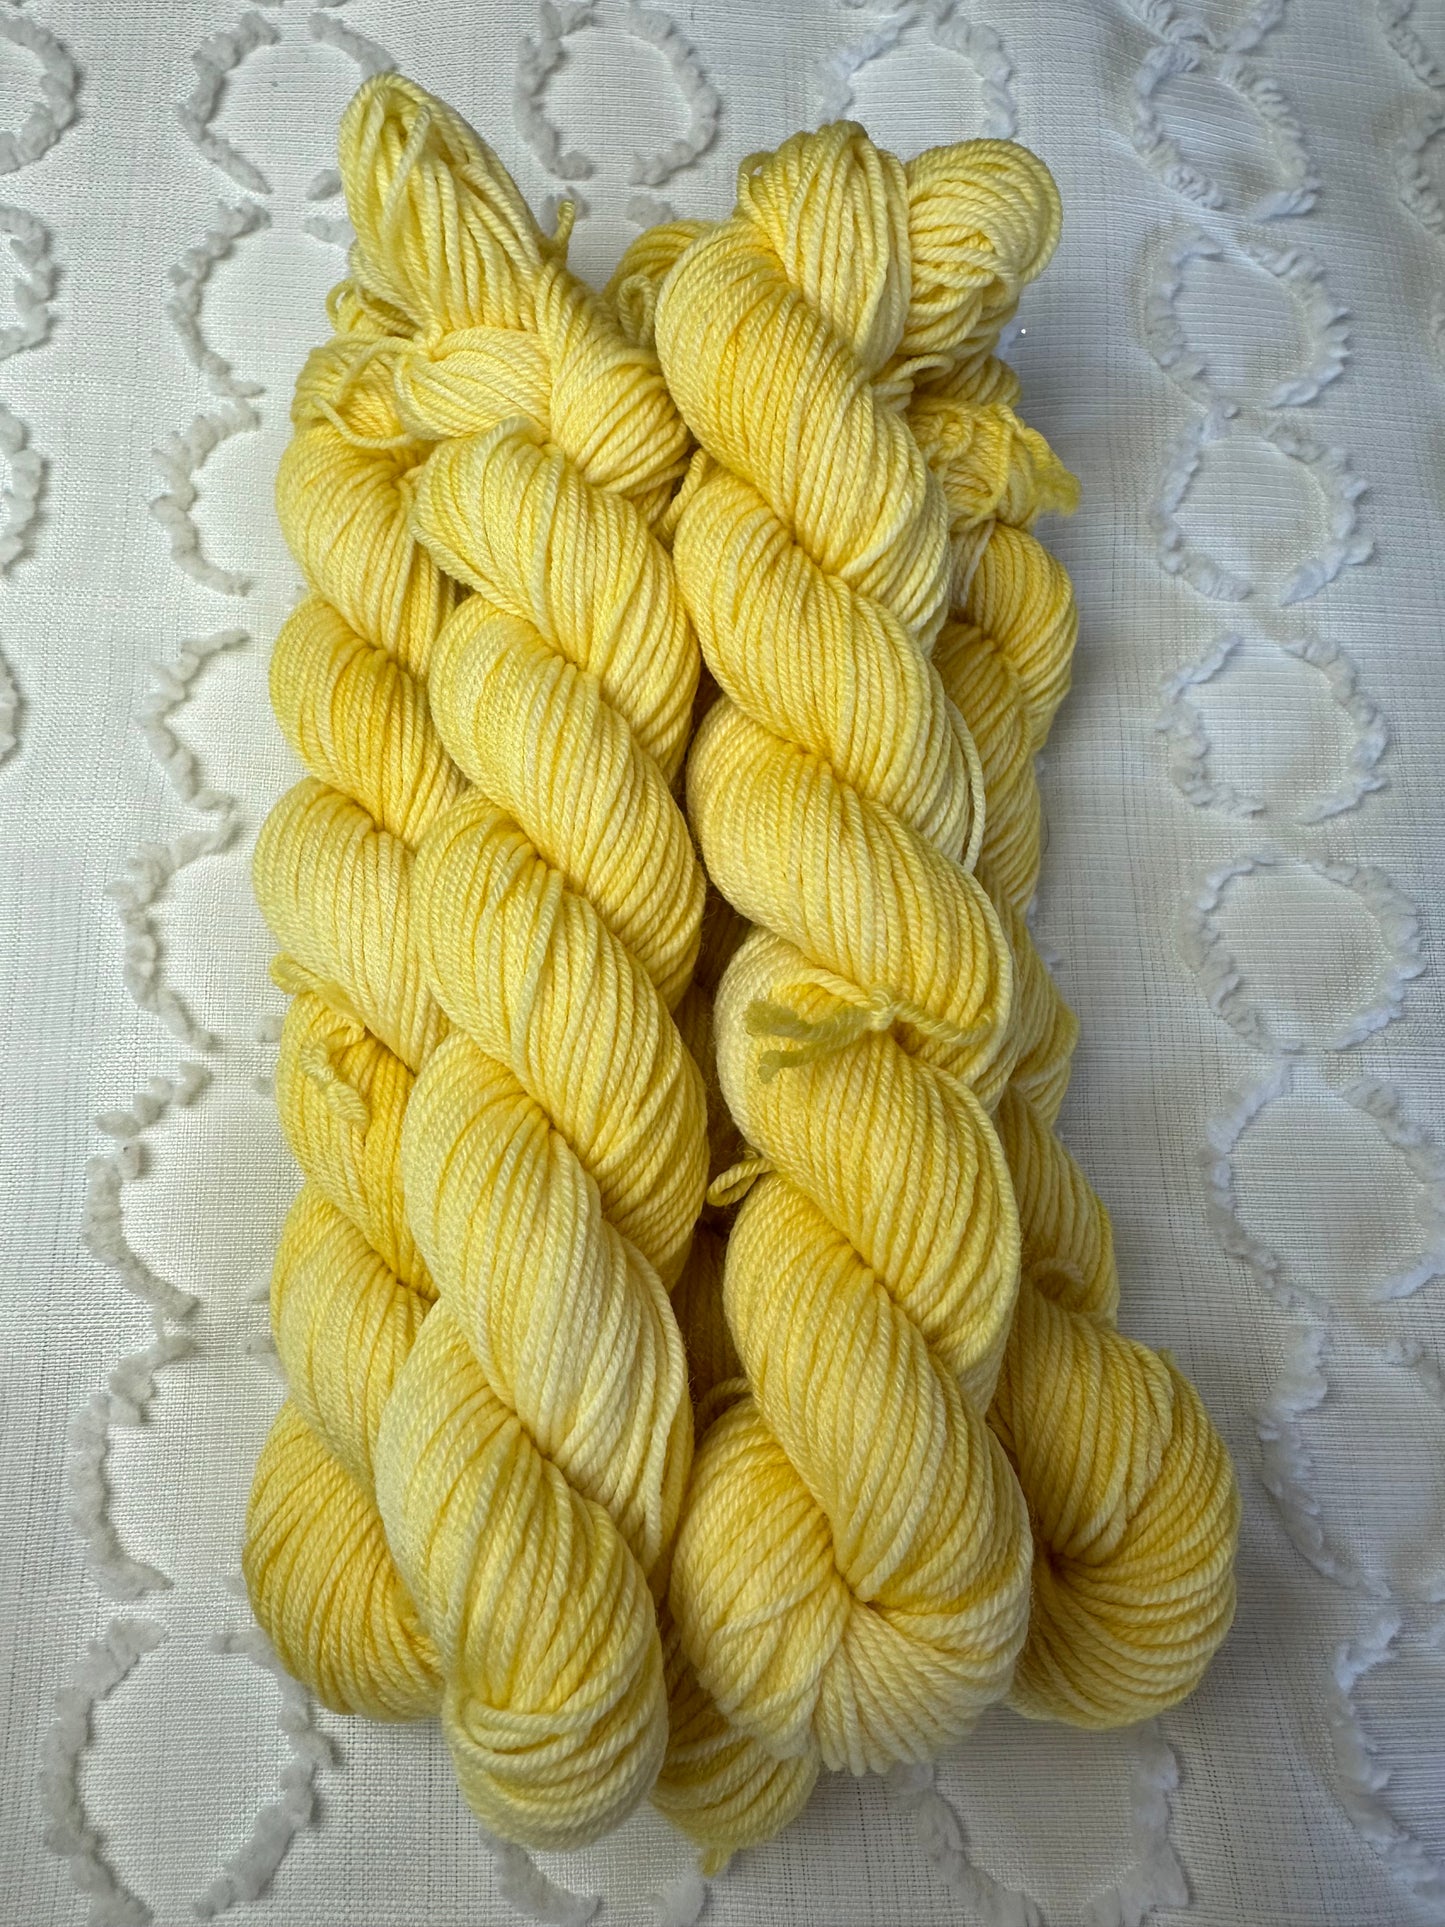 Winter Pillow Worsted / Upland Corn Yellow